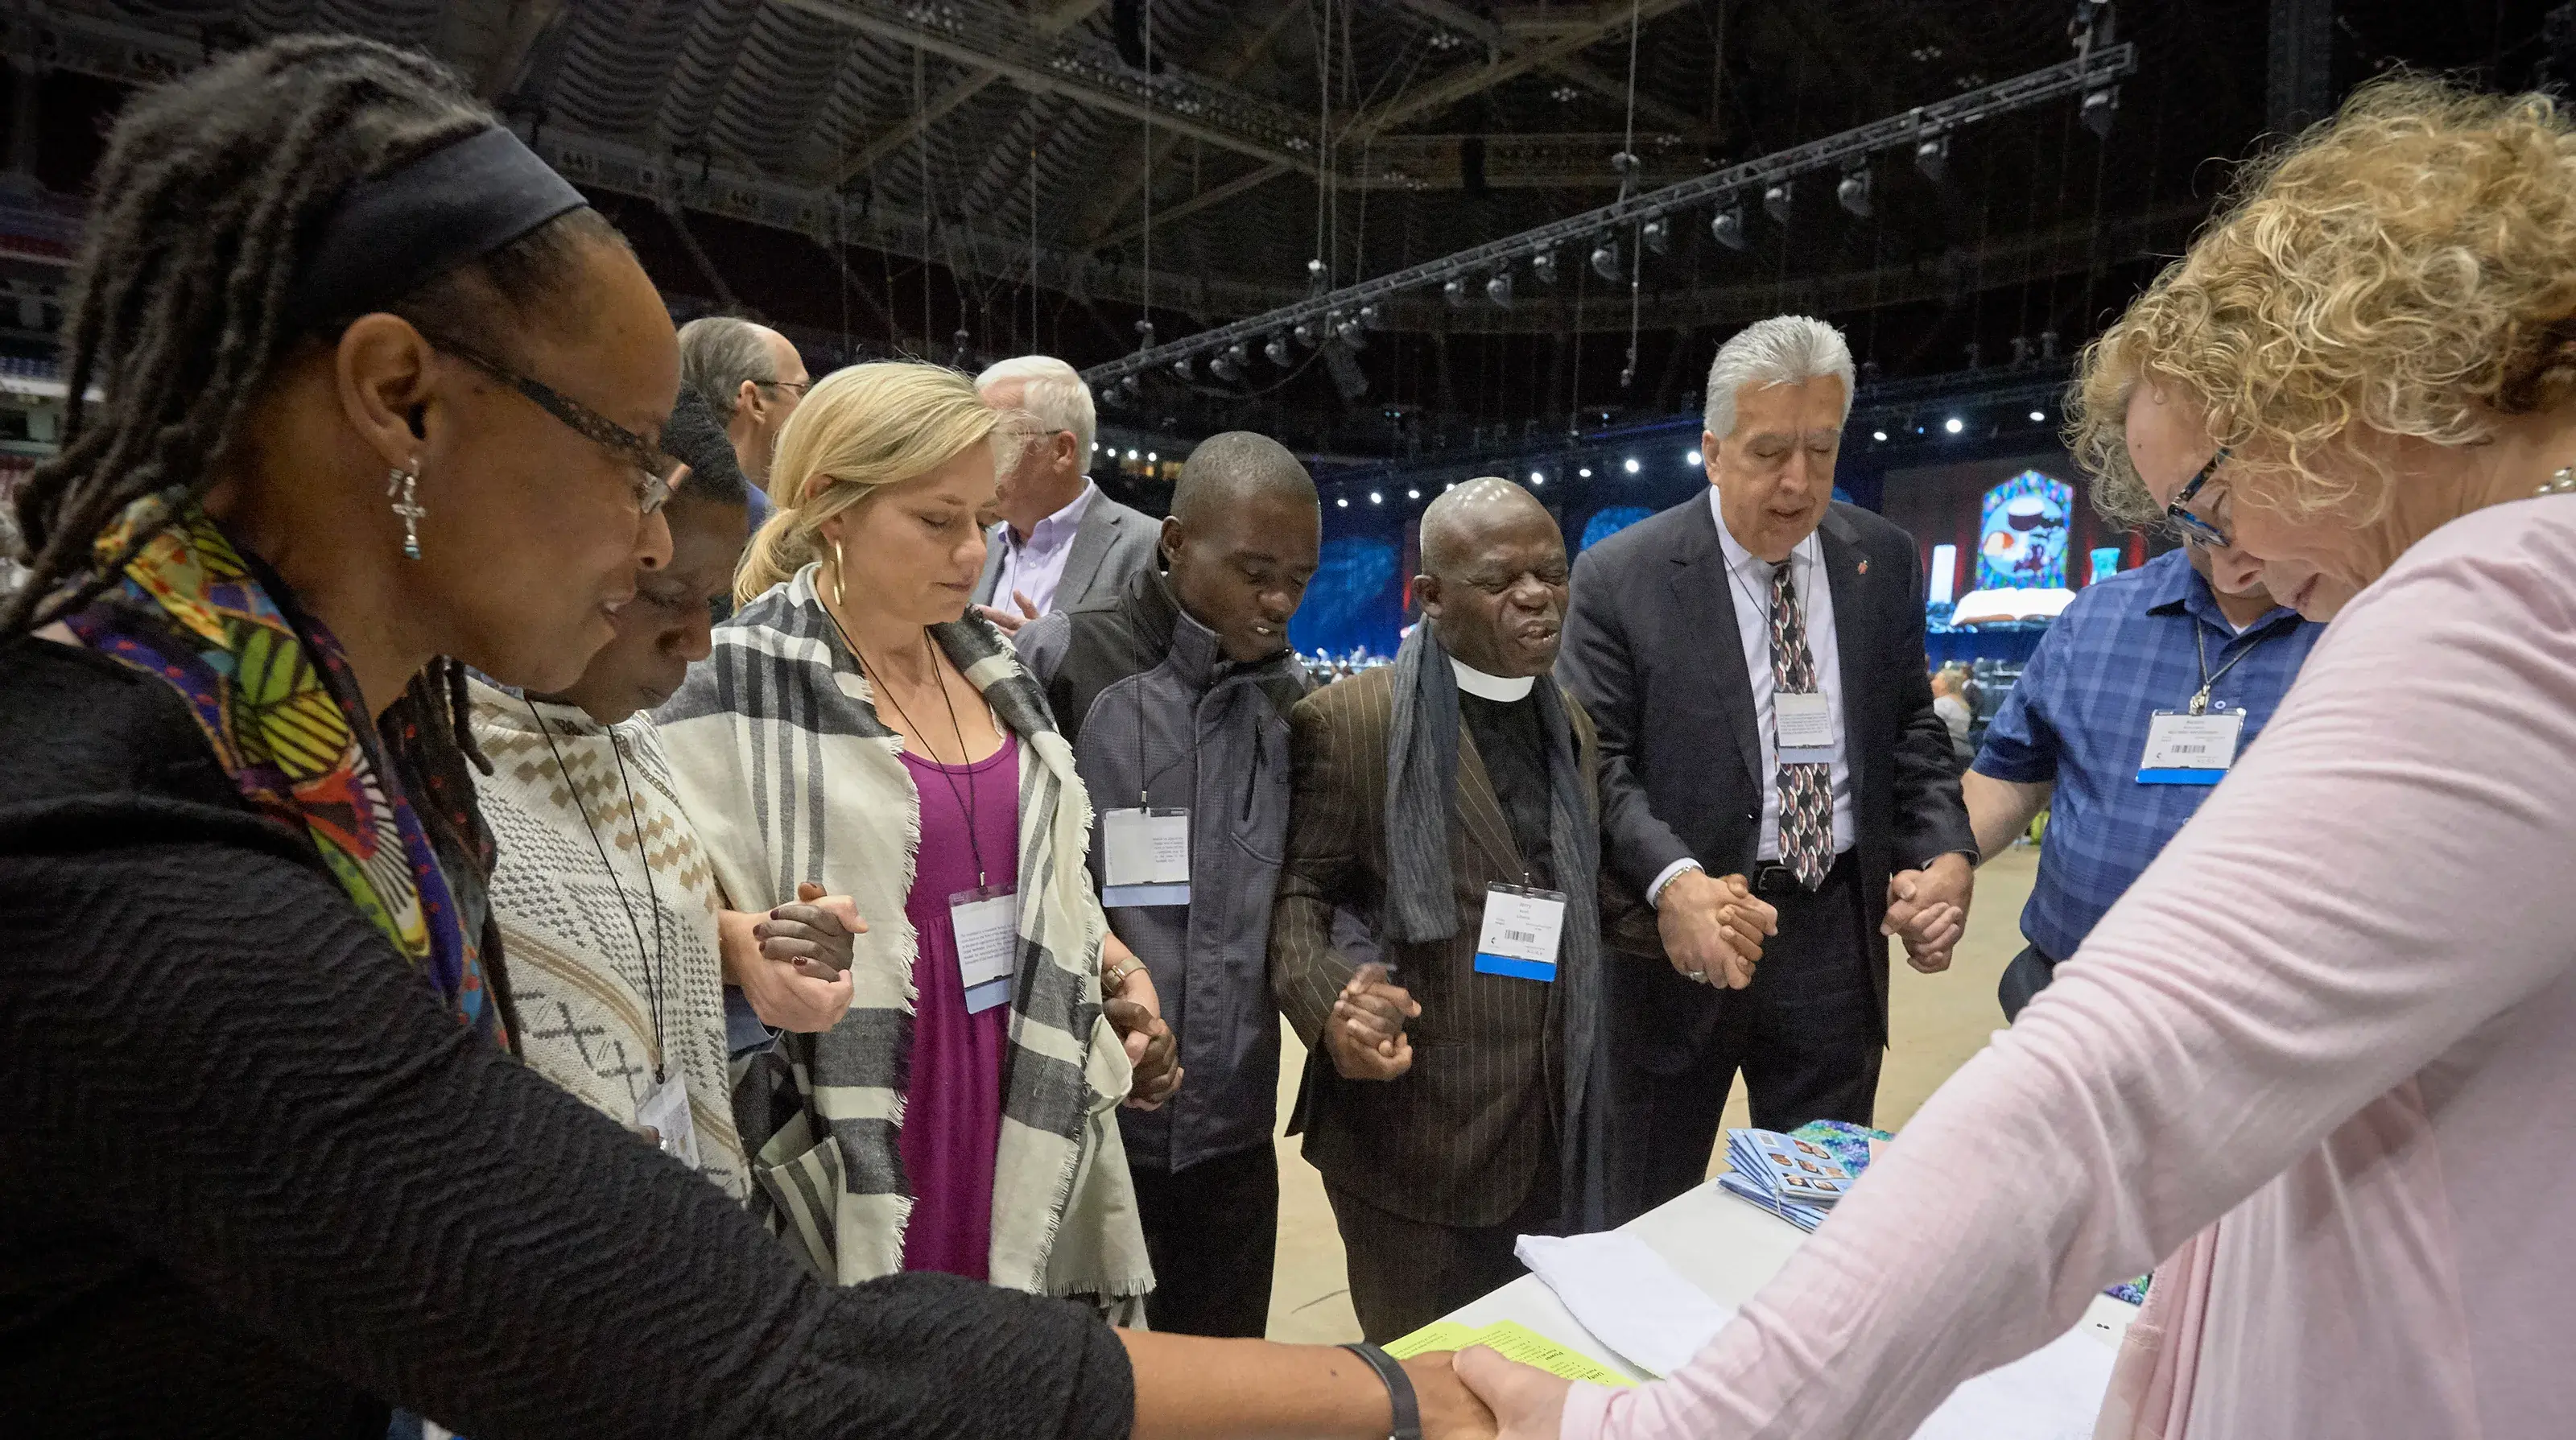 Delegates pray together during a Special Session of the General Conference of the United Methodist Church